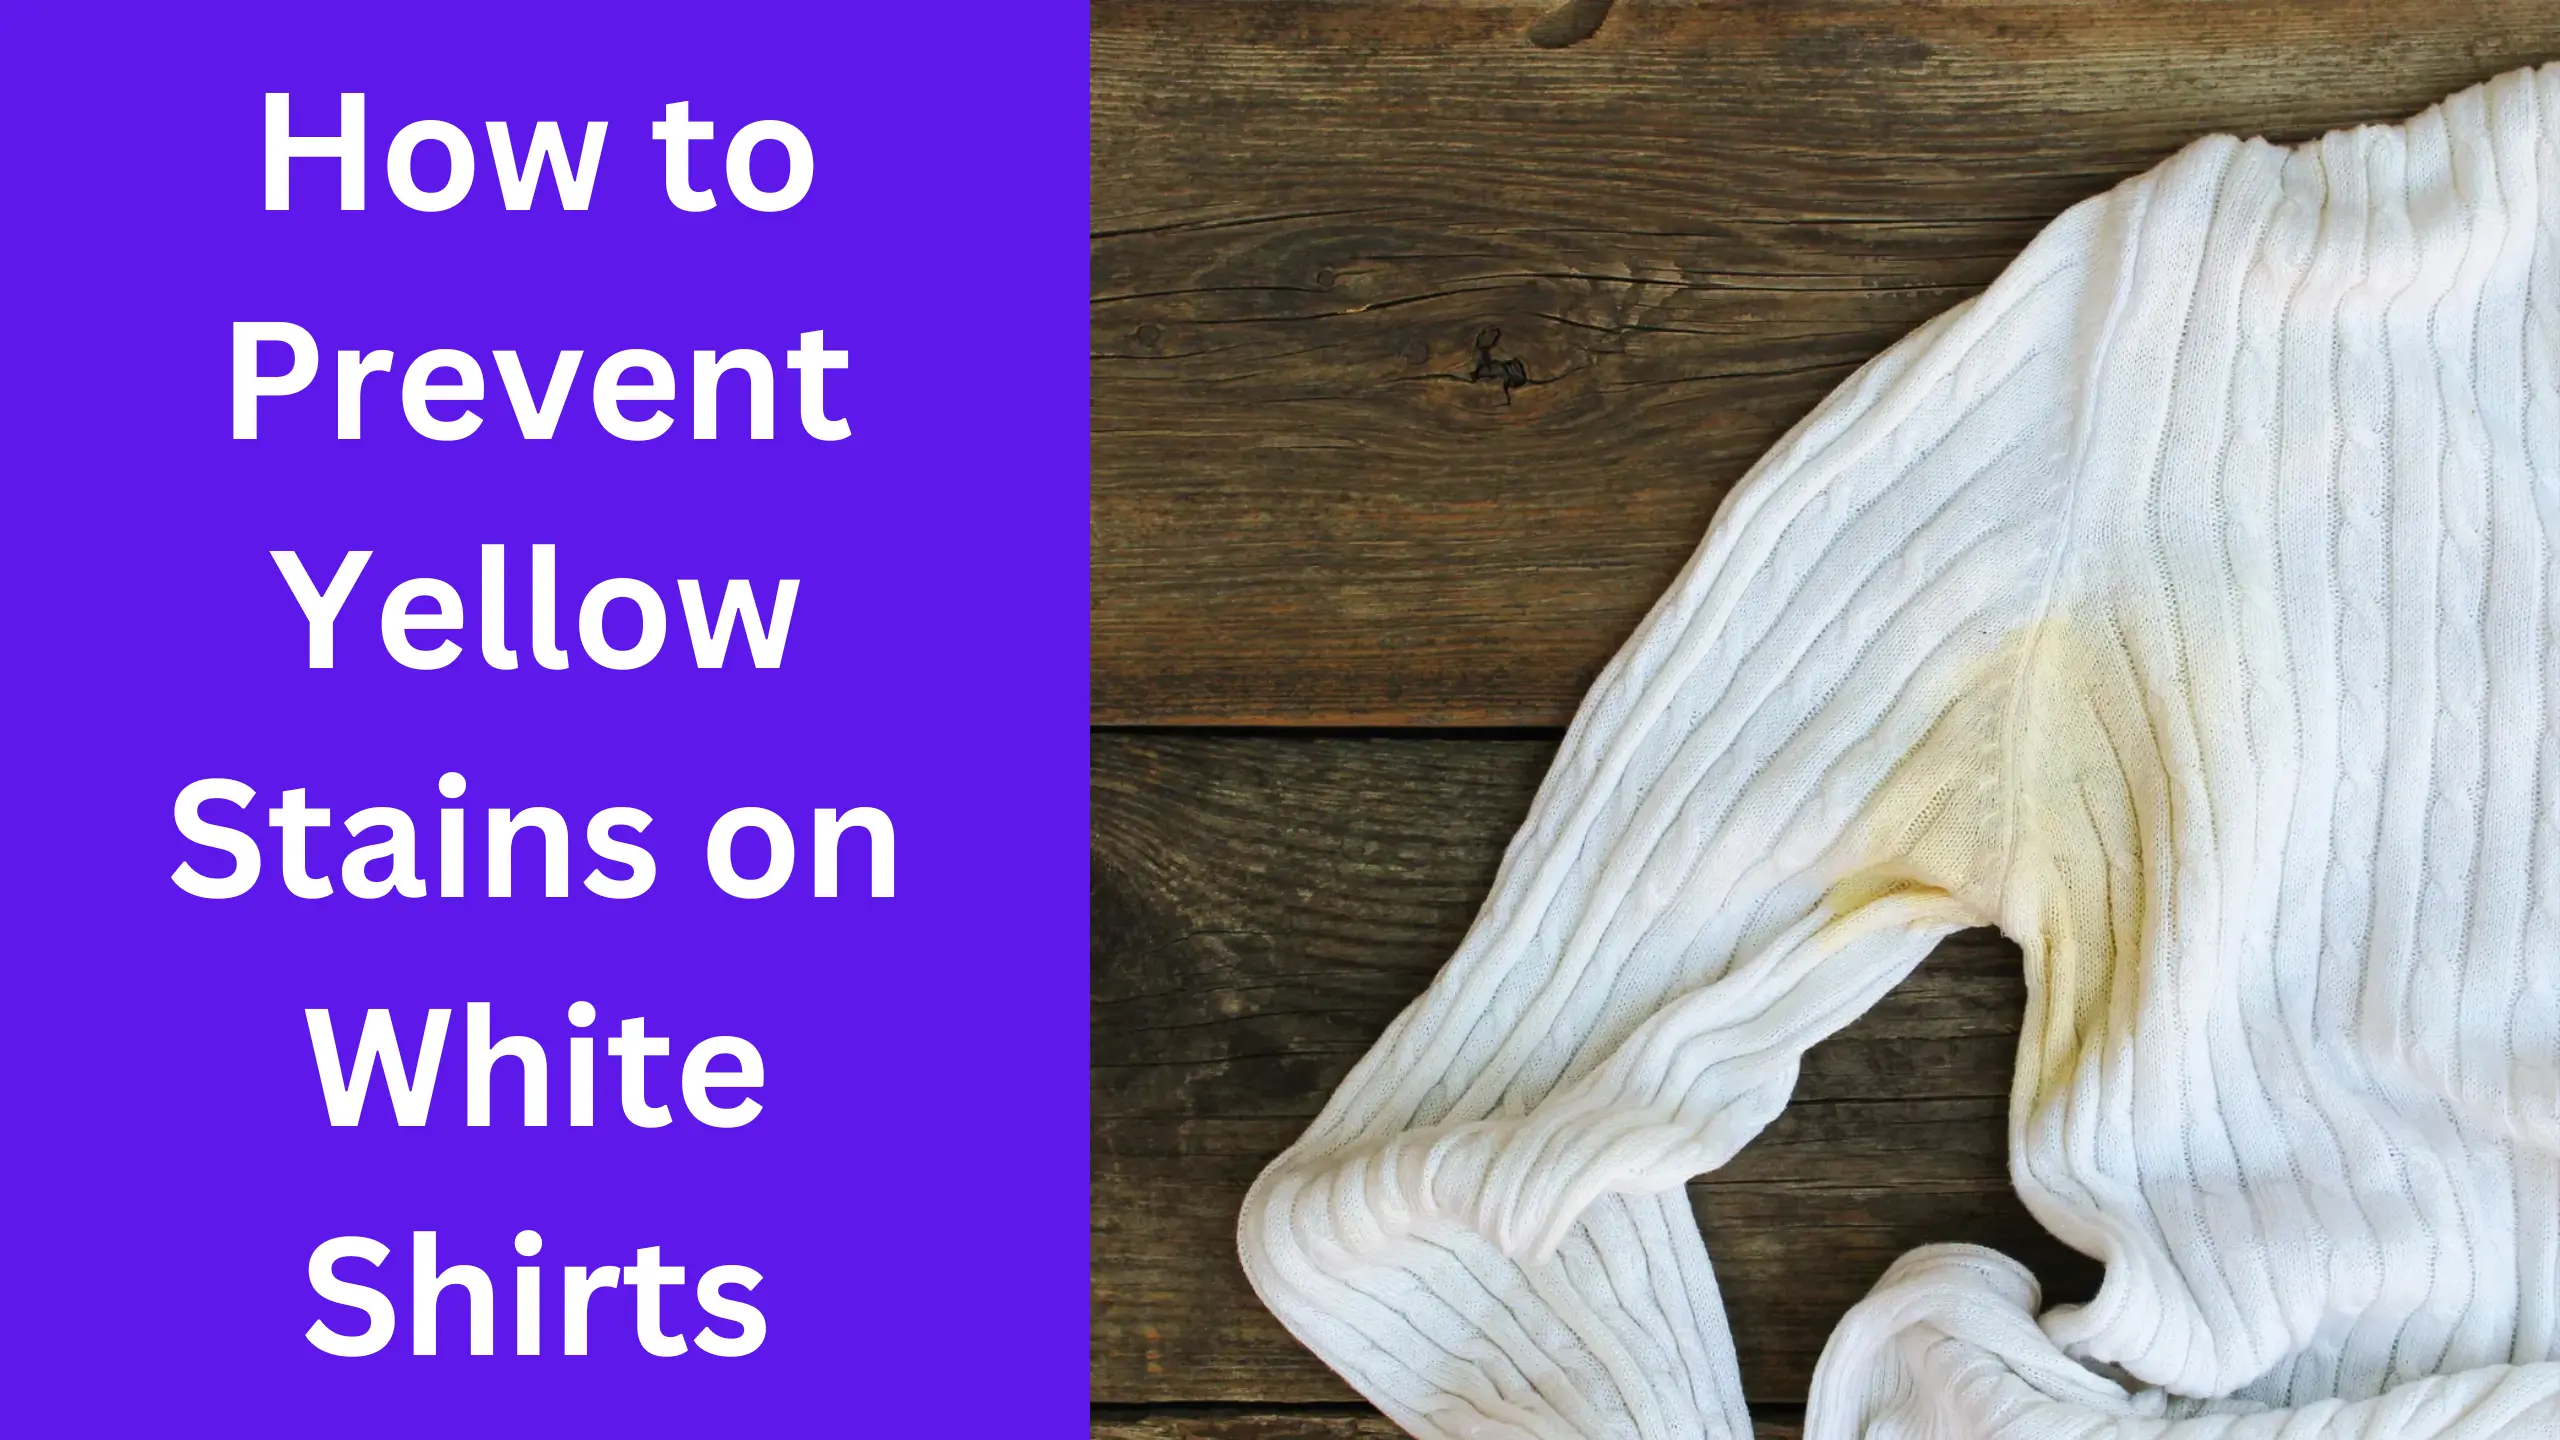 How to Prevent Yellow Stains on White Shirts